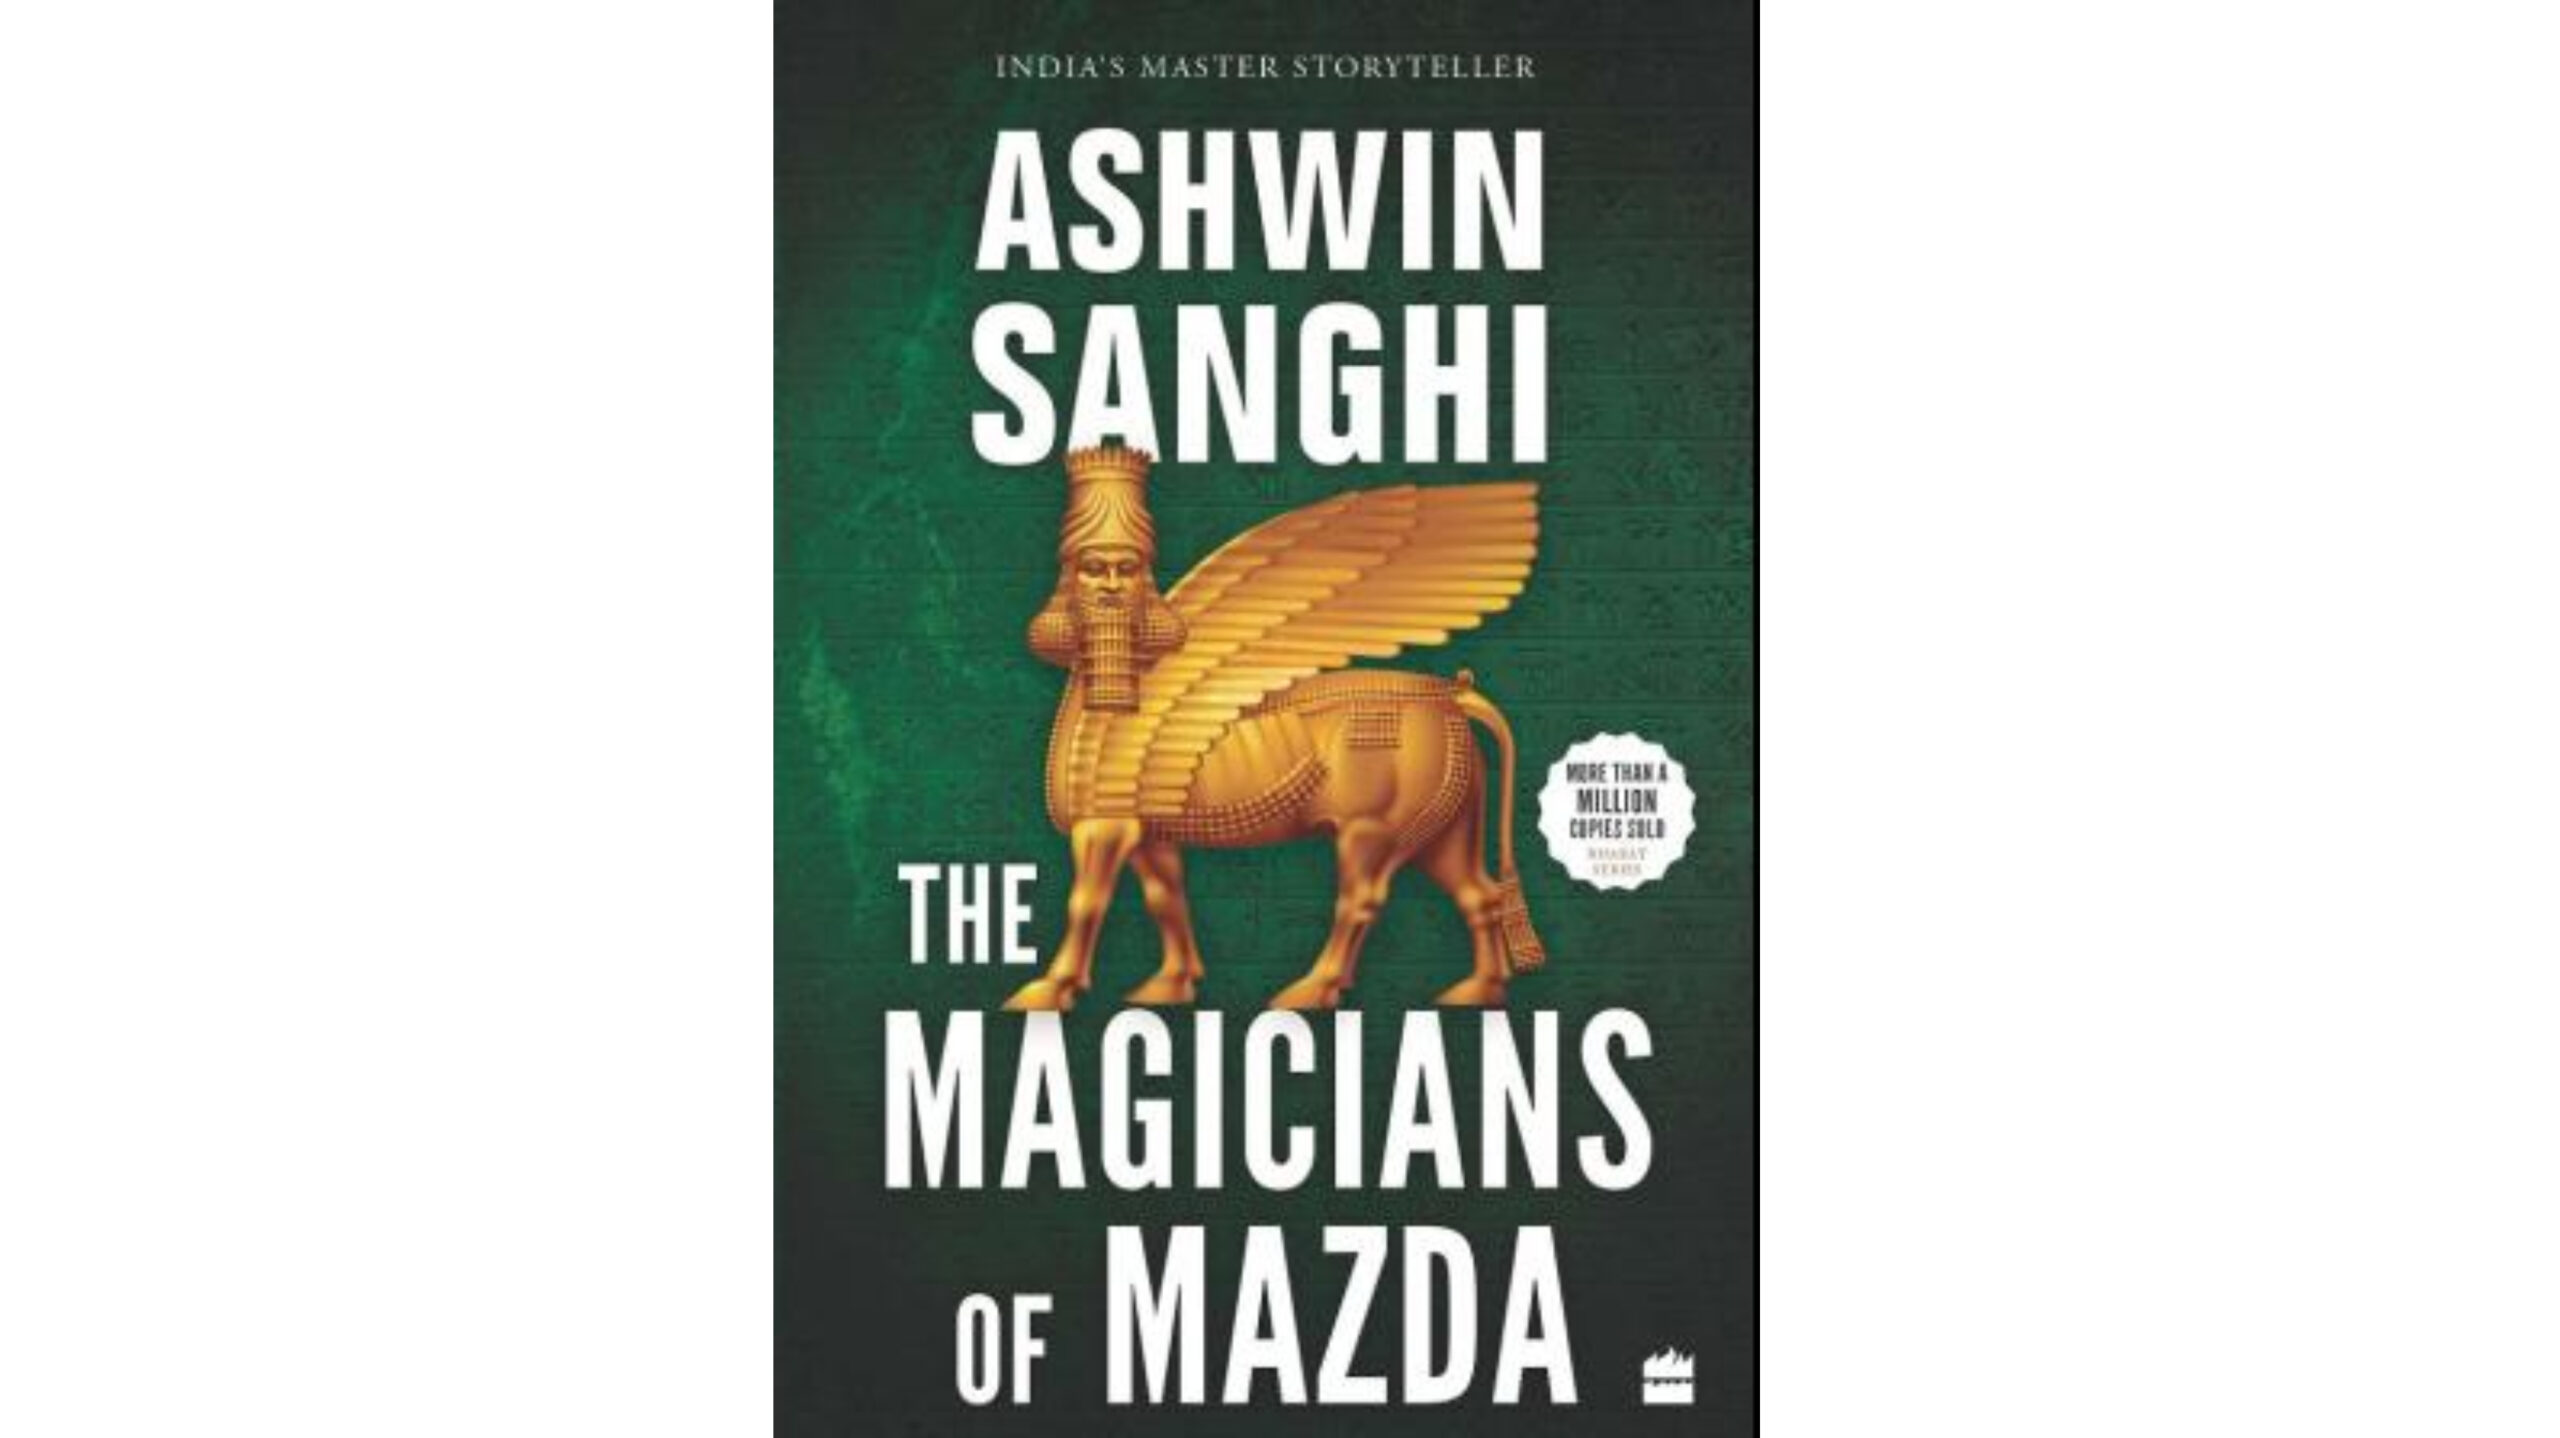 Book Review: The Magicians Of Mazda By Ashwin Sanghi